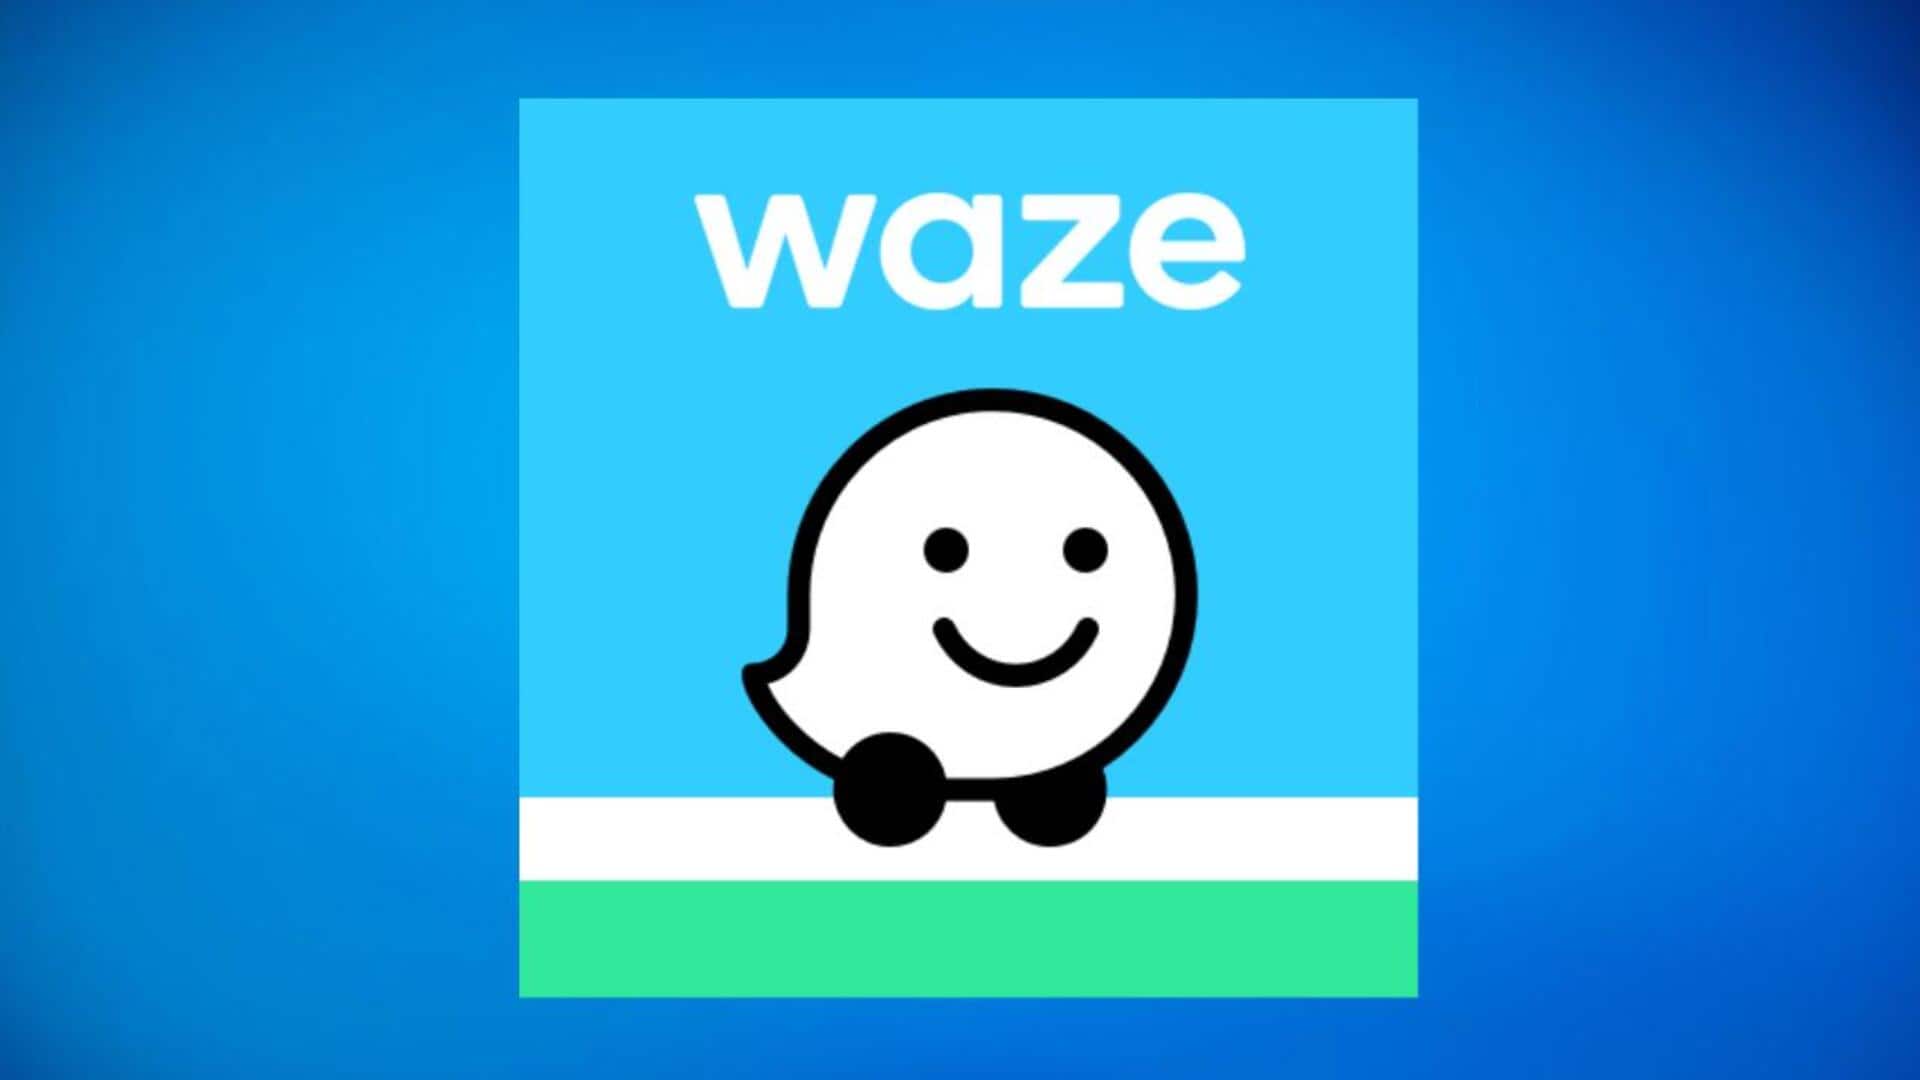 Tips to master your commute with the Waze app